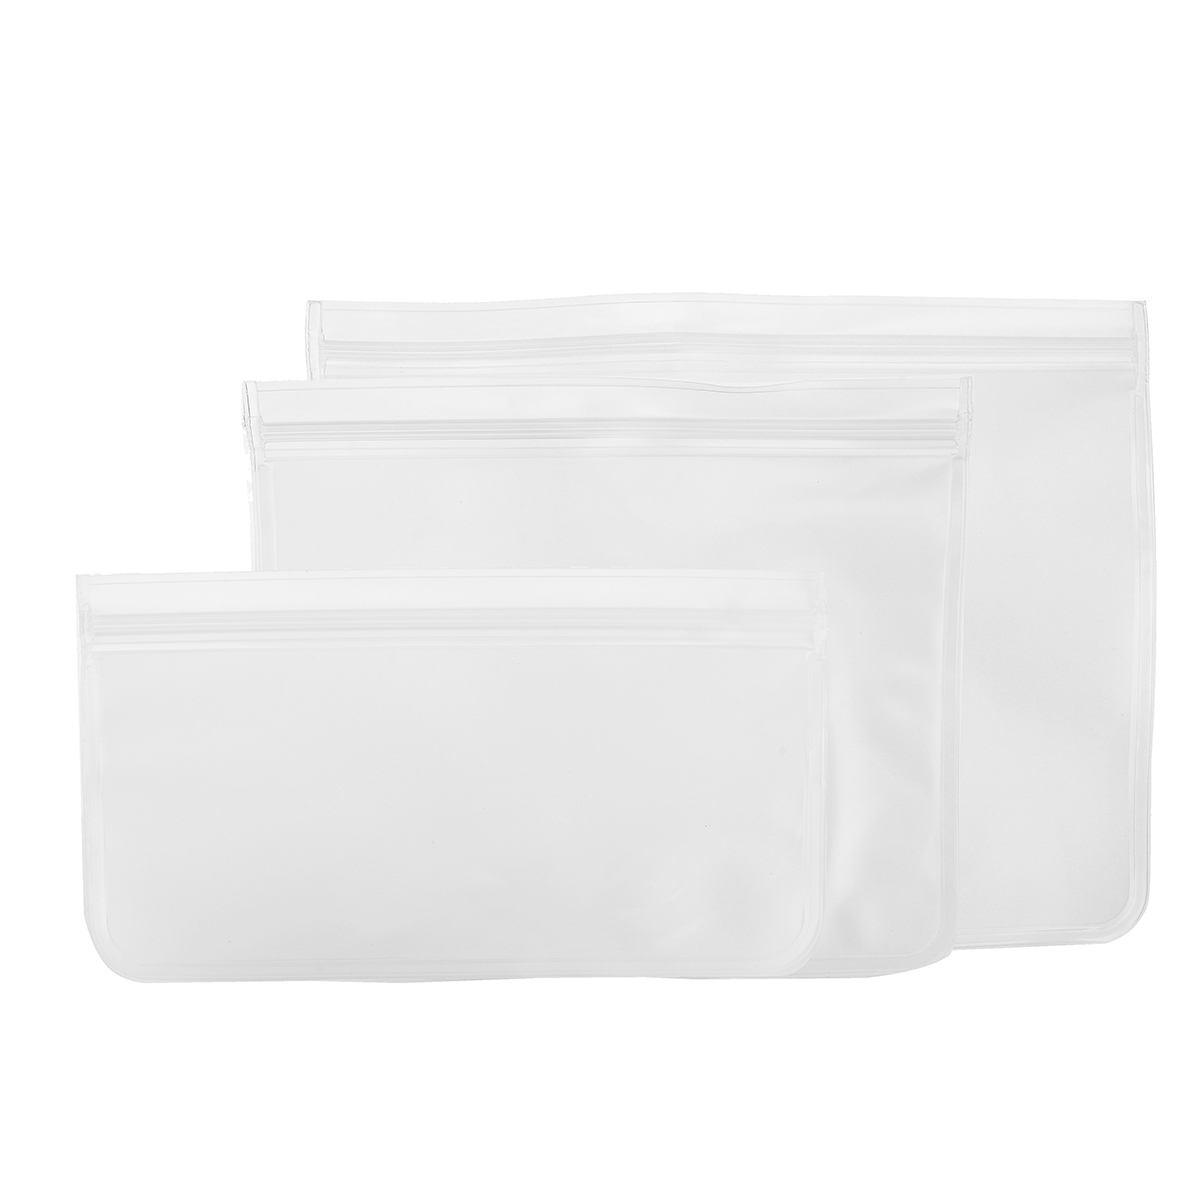 Food-Storage-Bags-Reusable-Silicone-Containers-for-Lunch-Vegetable-Resealable-Kitchen-Storage-Bag-1680145-8